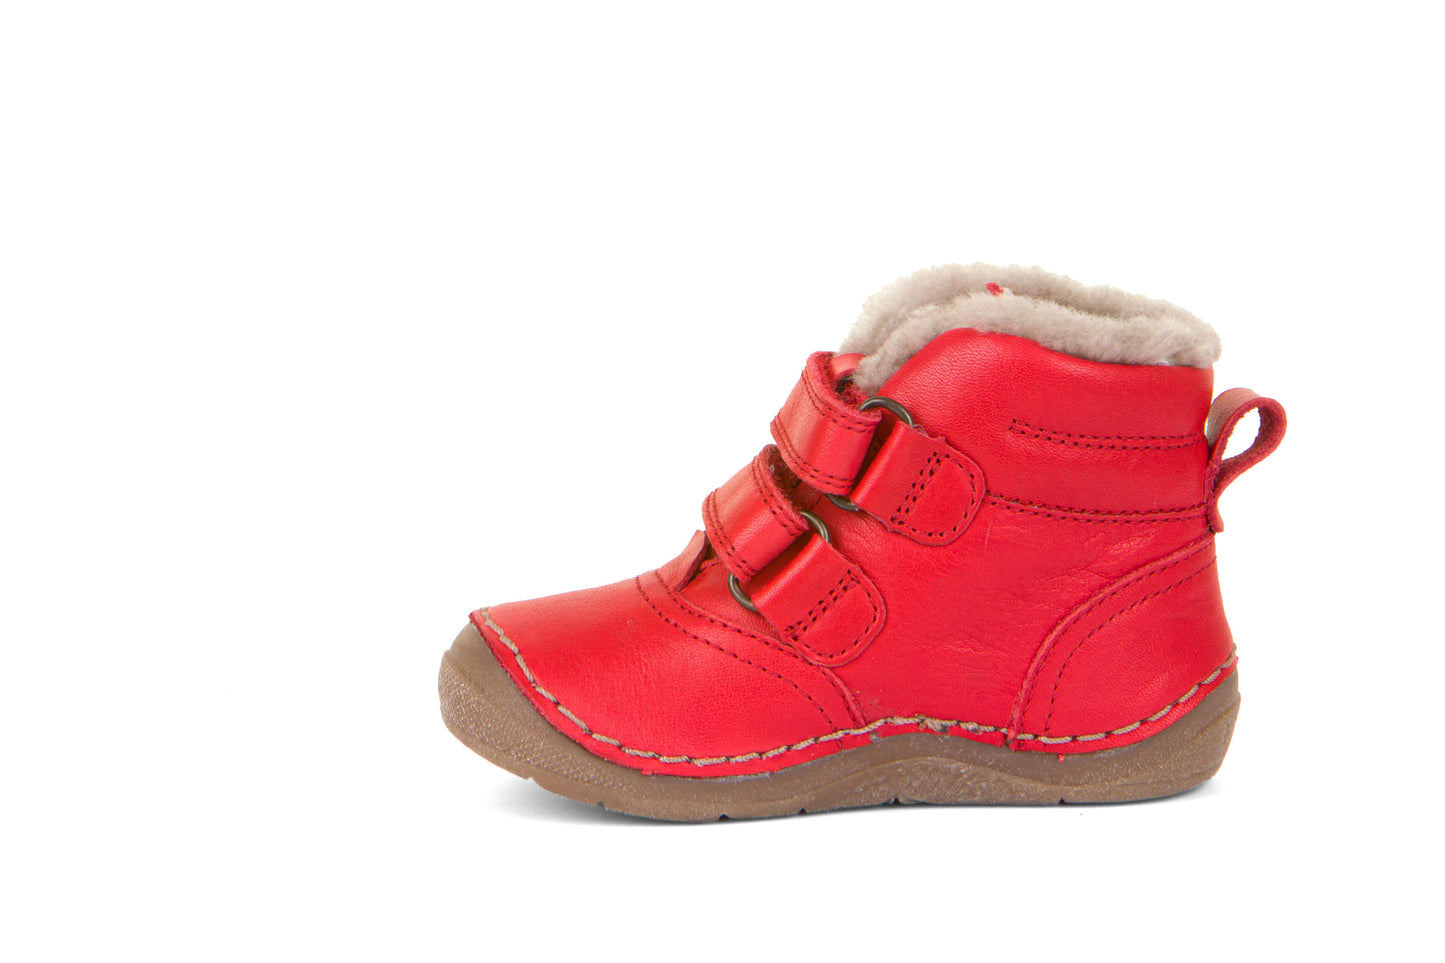 A unisex sheepskin lined boot by Froddo, style Paix Winter G2110113-11 in Red. Left side view.